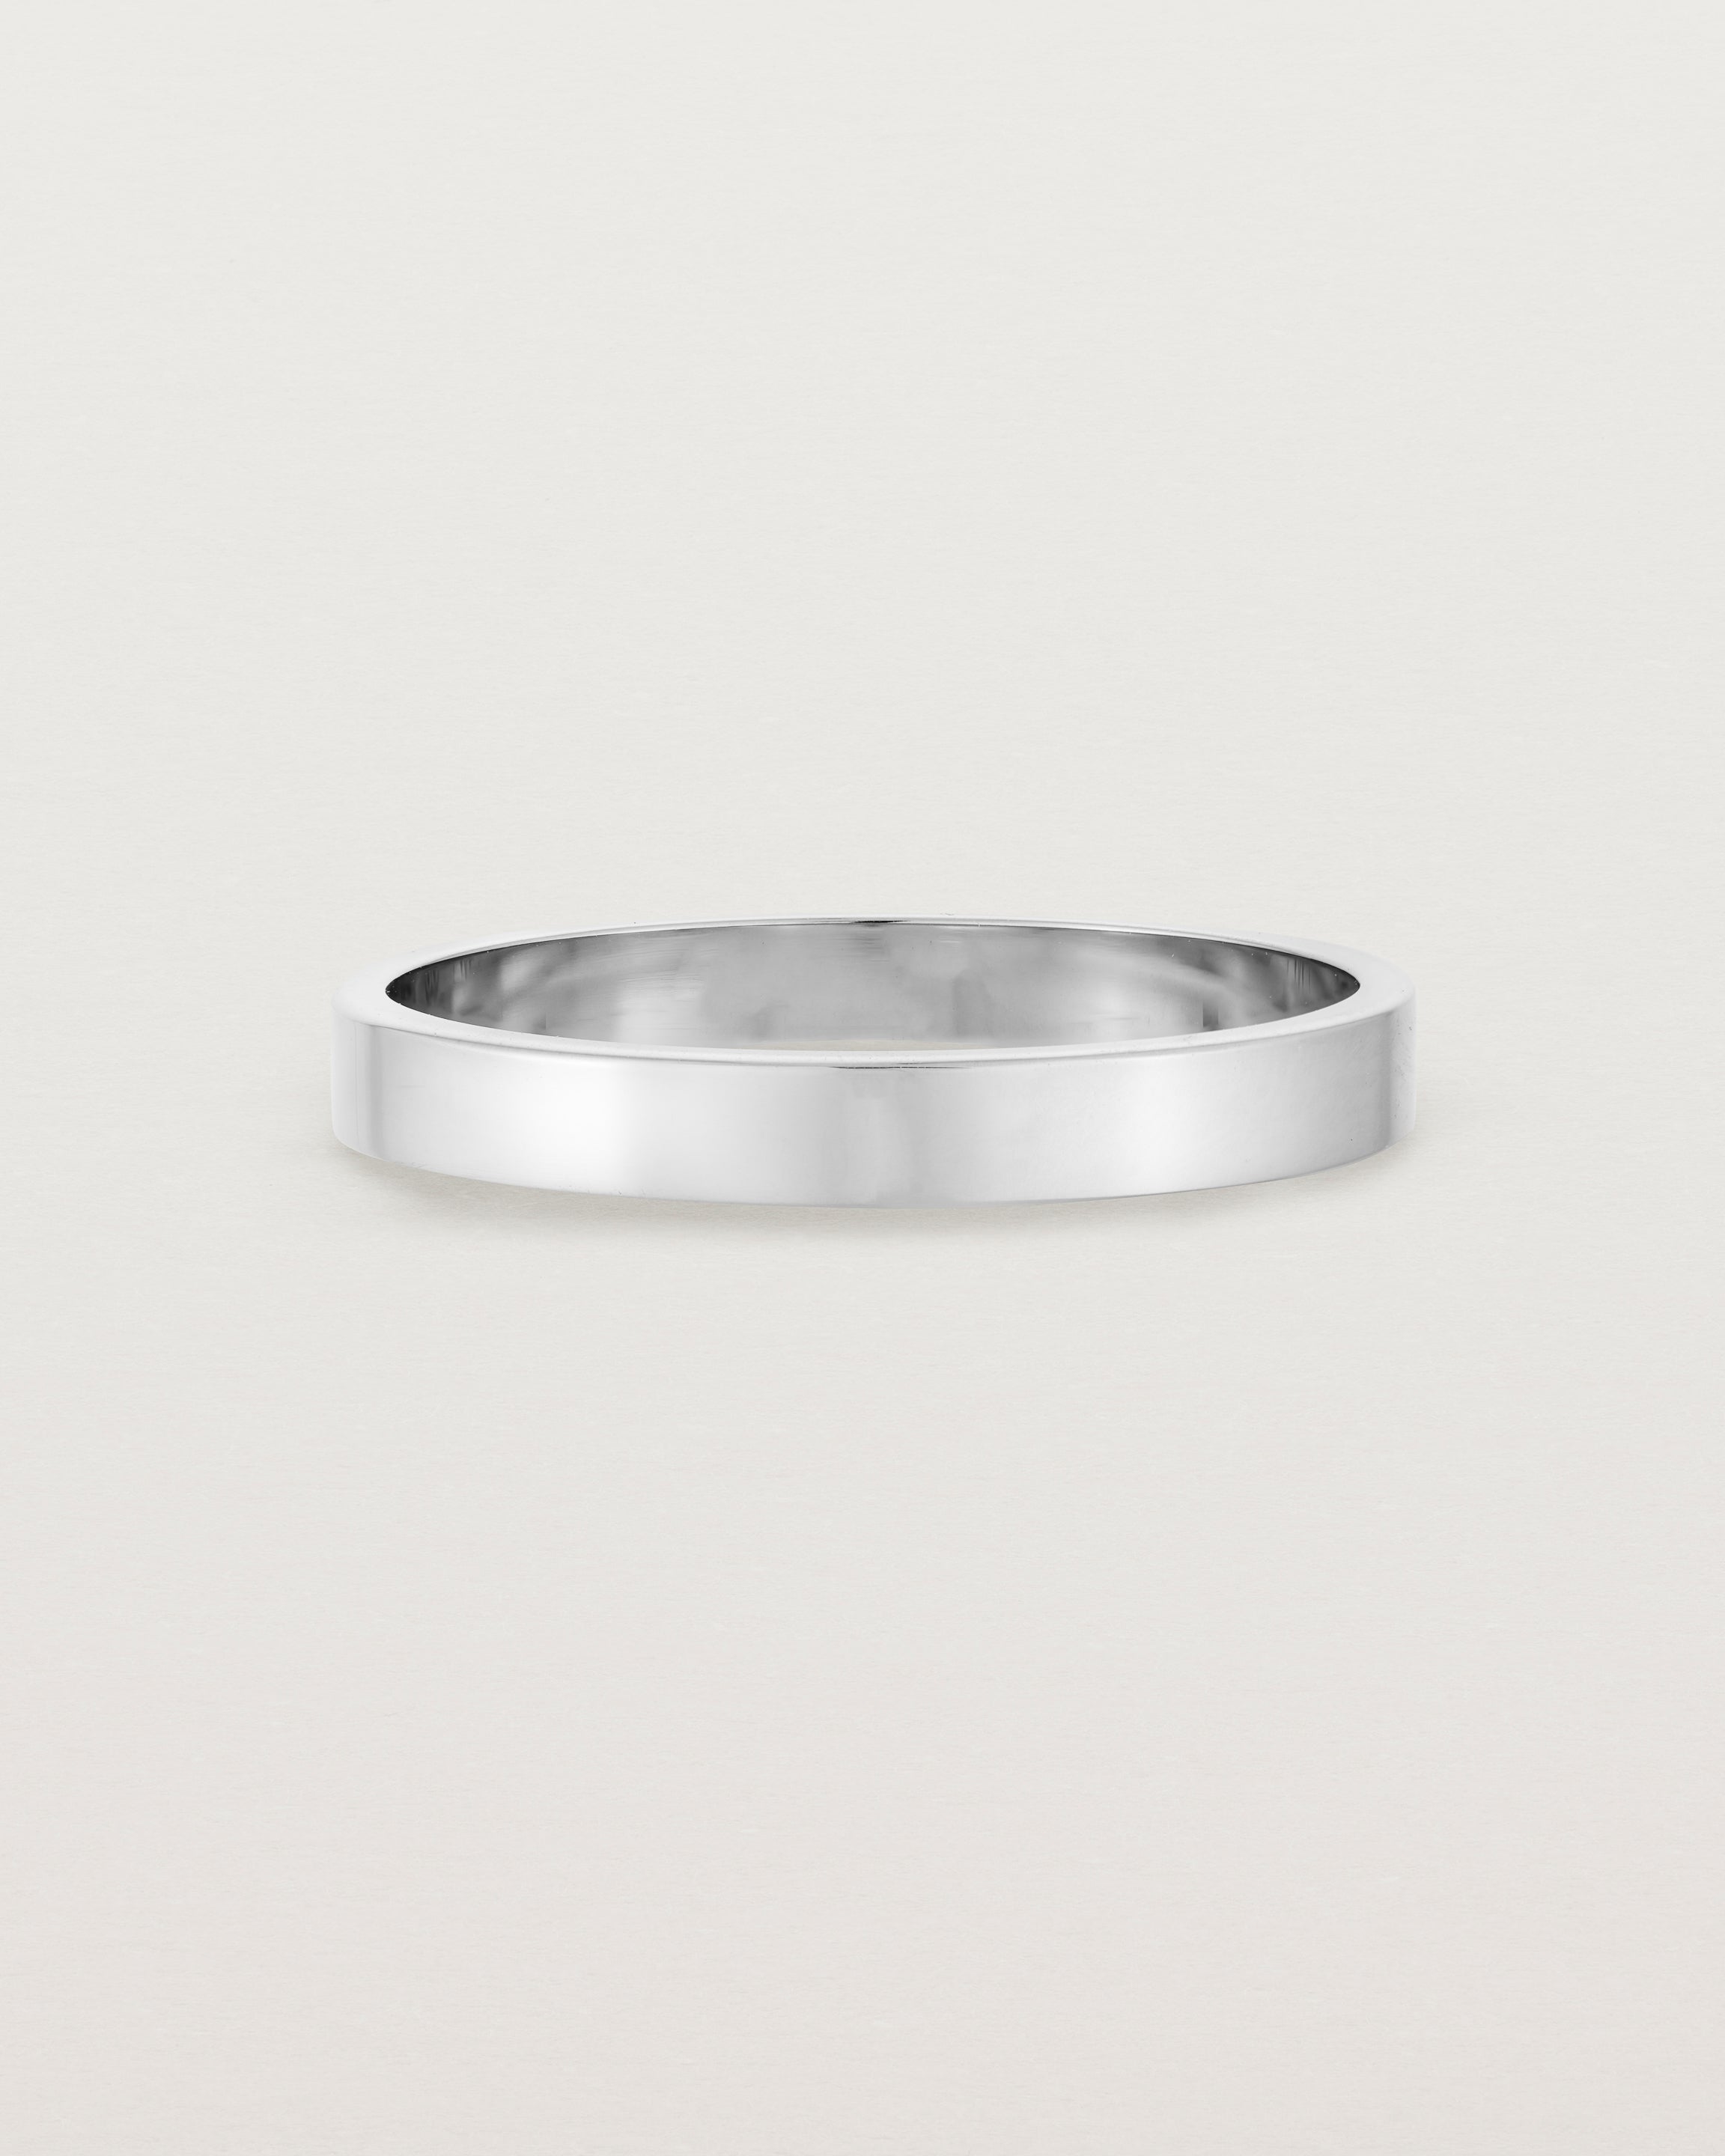 Our square, flat 3mm profile wedding band crafted in white gold